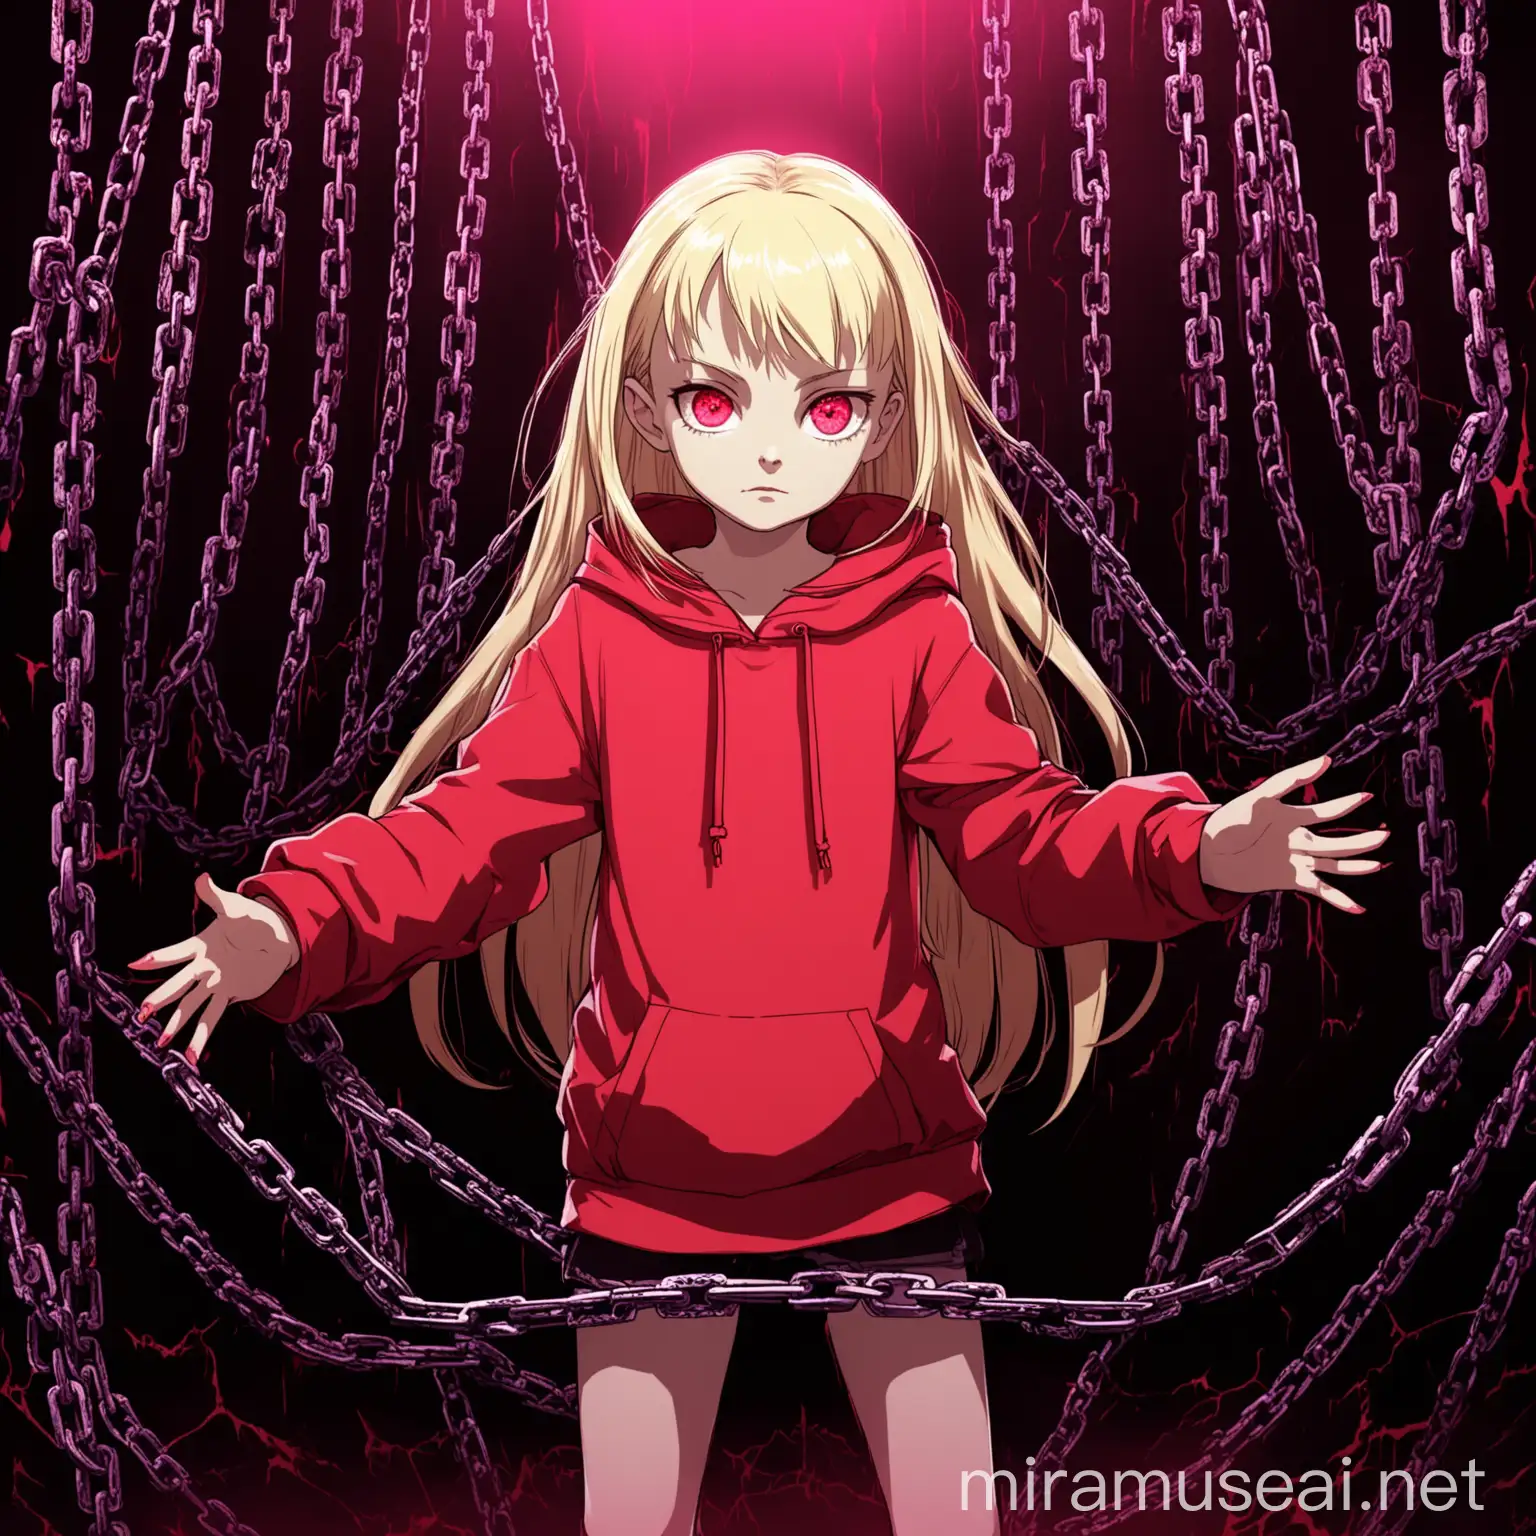 Blonde Villain Girl in Red Hoodie Surrounded by Pink Chains